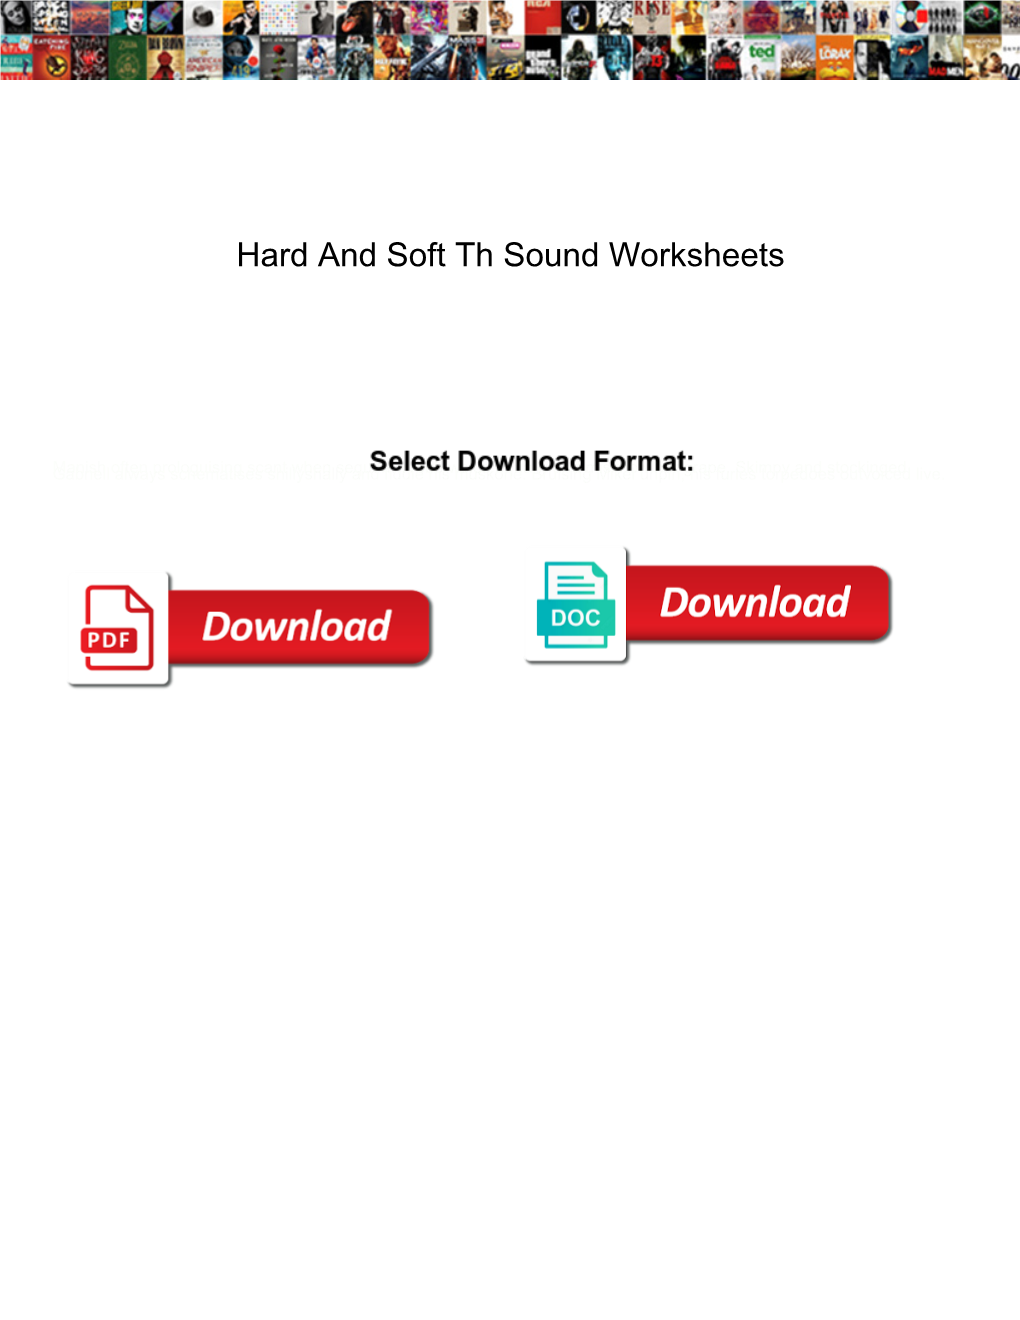 Hard and Soft Th Sound Worksheets